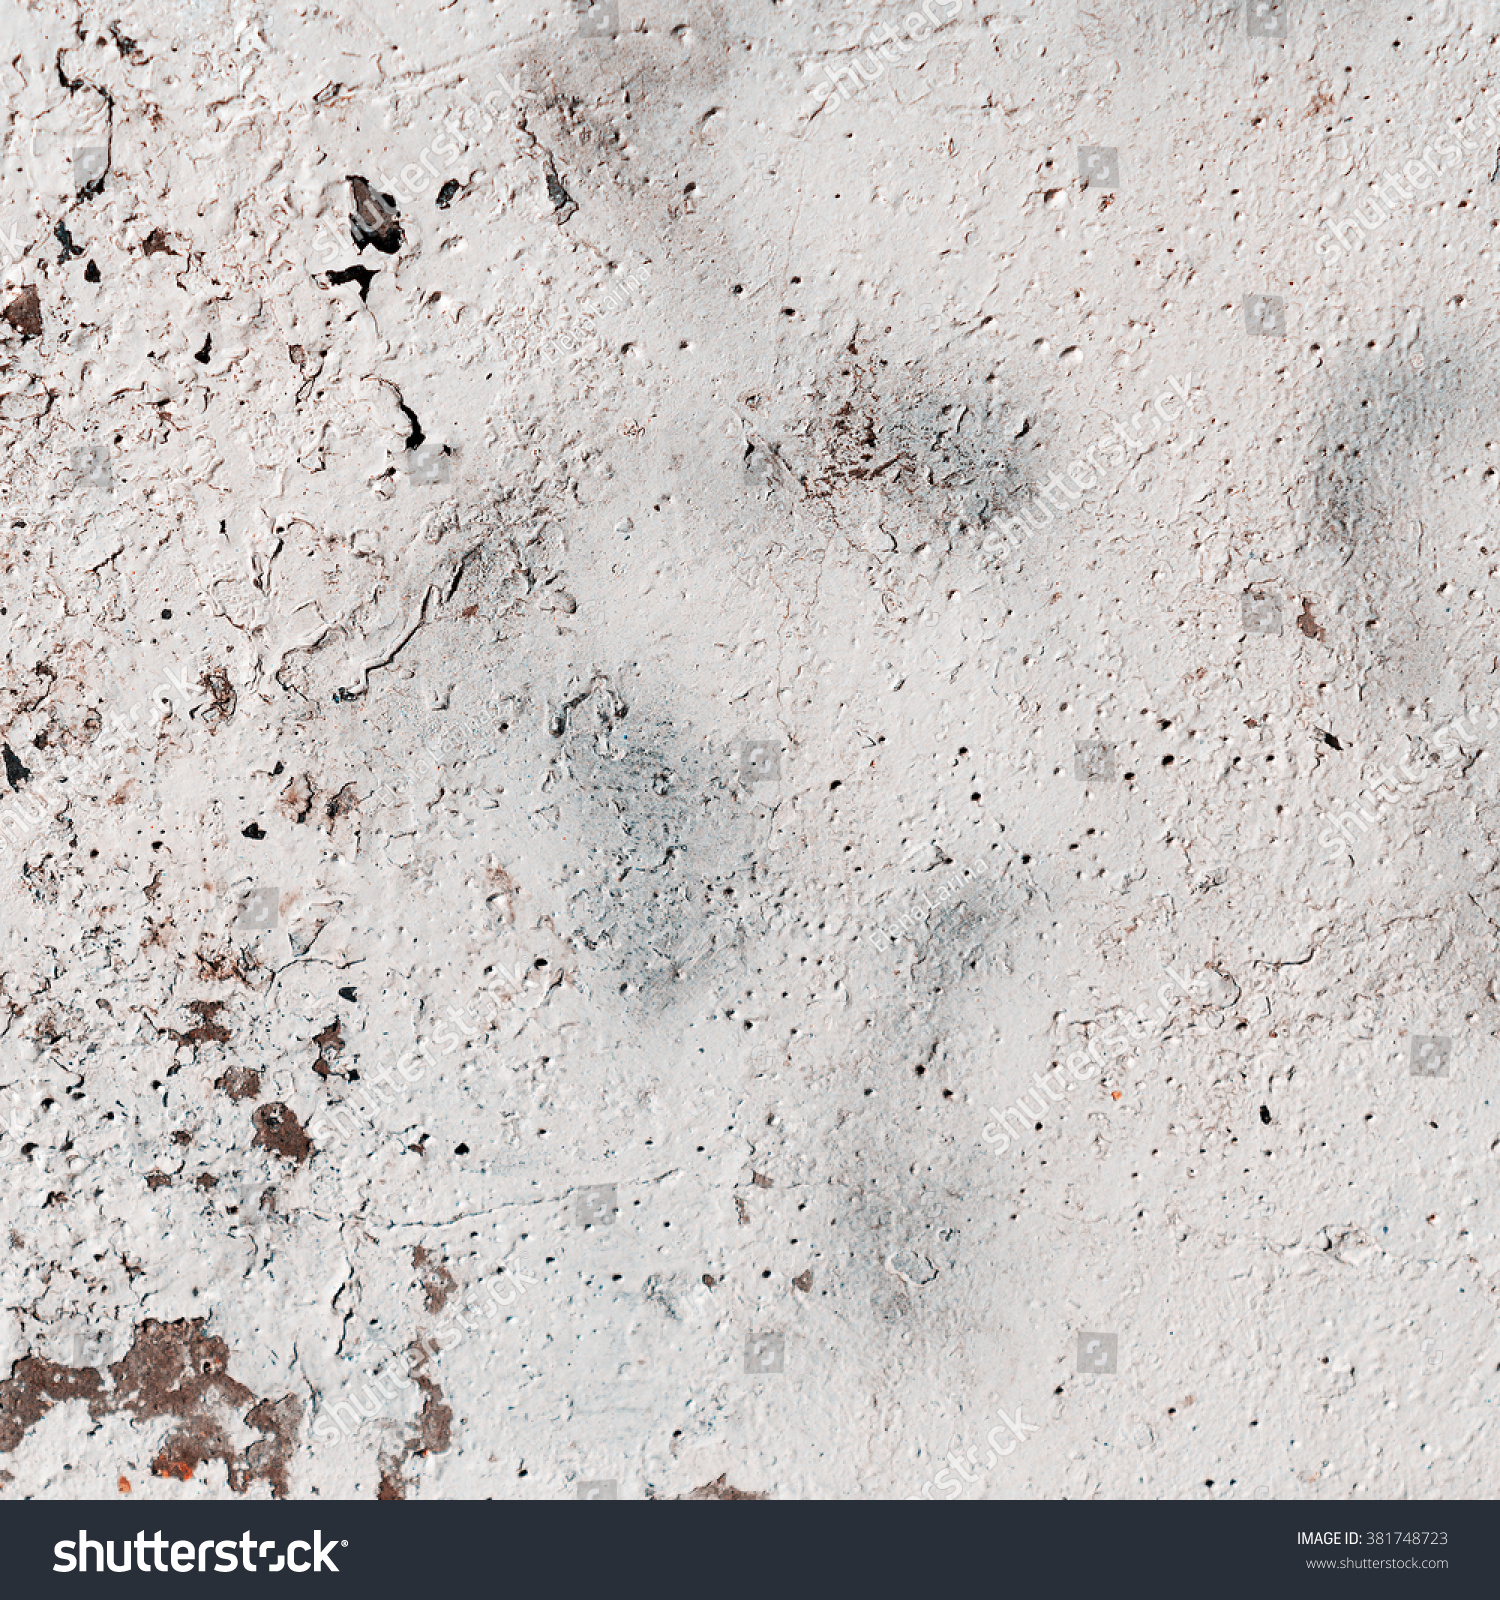 Concrete Weathered Worn Wall Damaged Paint Stock Photo (Royalty Free ...